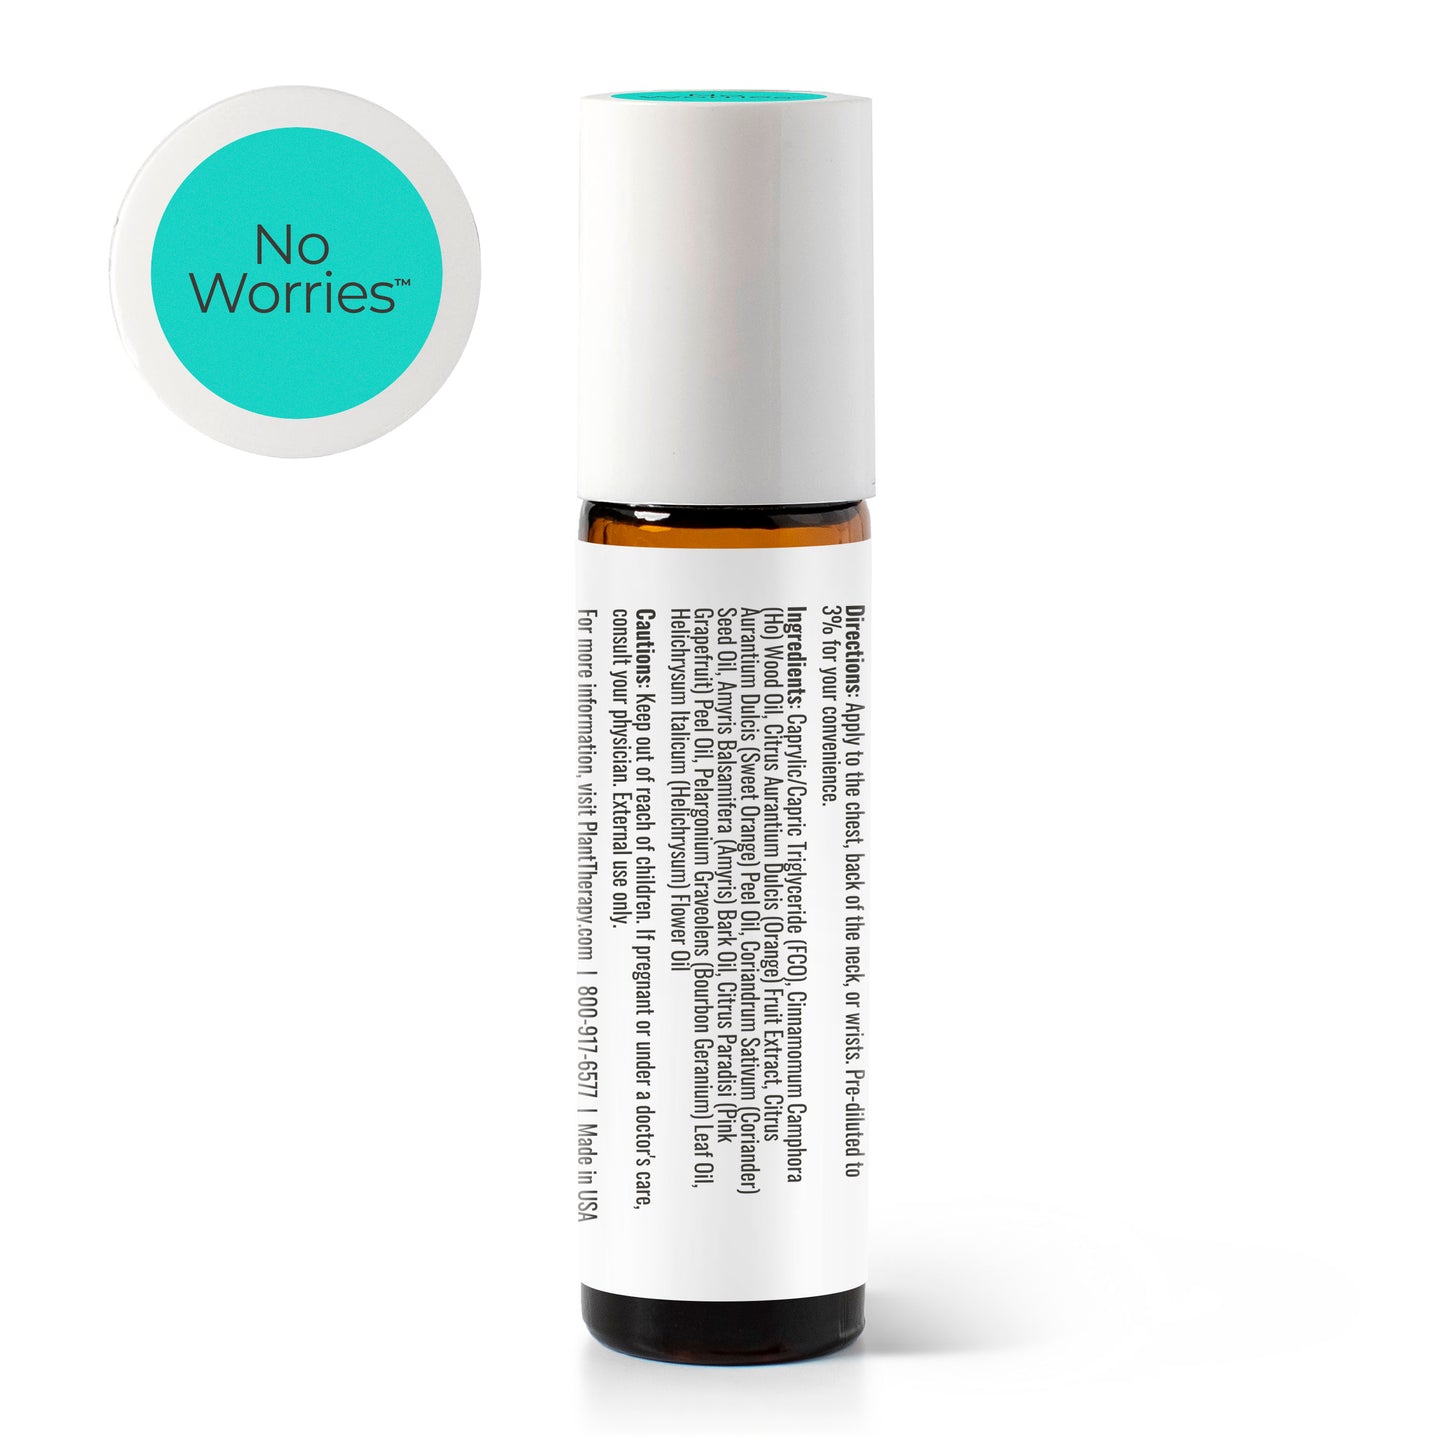 No Worries KidSafe Essential Oil Blend Pre-Diluted Roll-On's back label ingredient panel